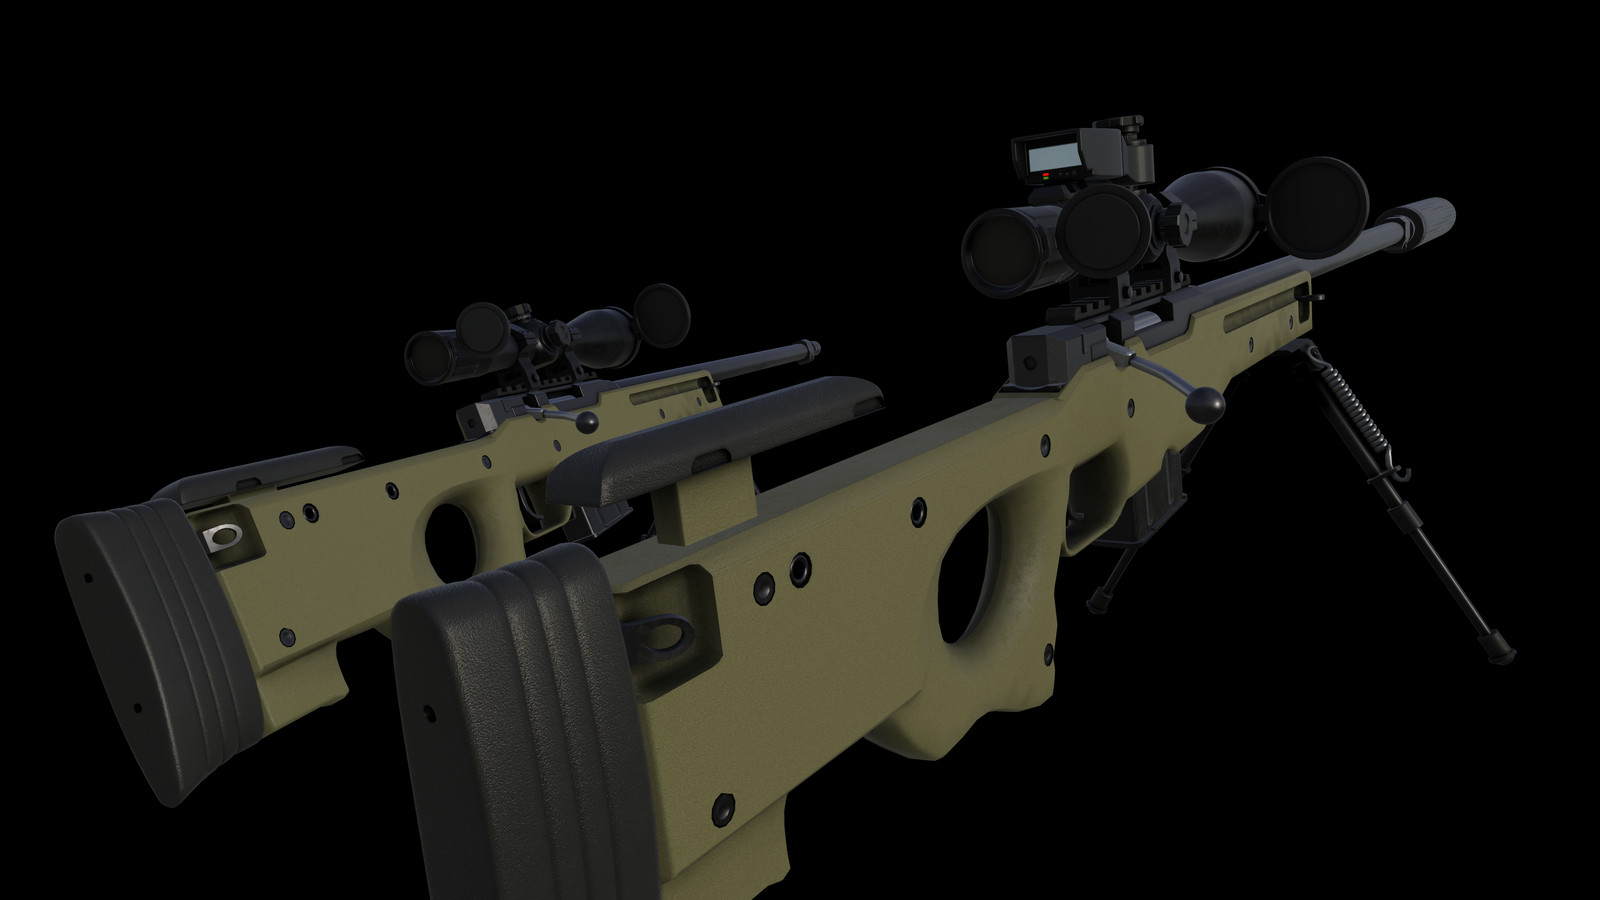 Awp cannons kg tr фото 44